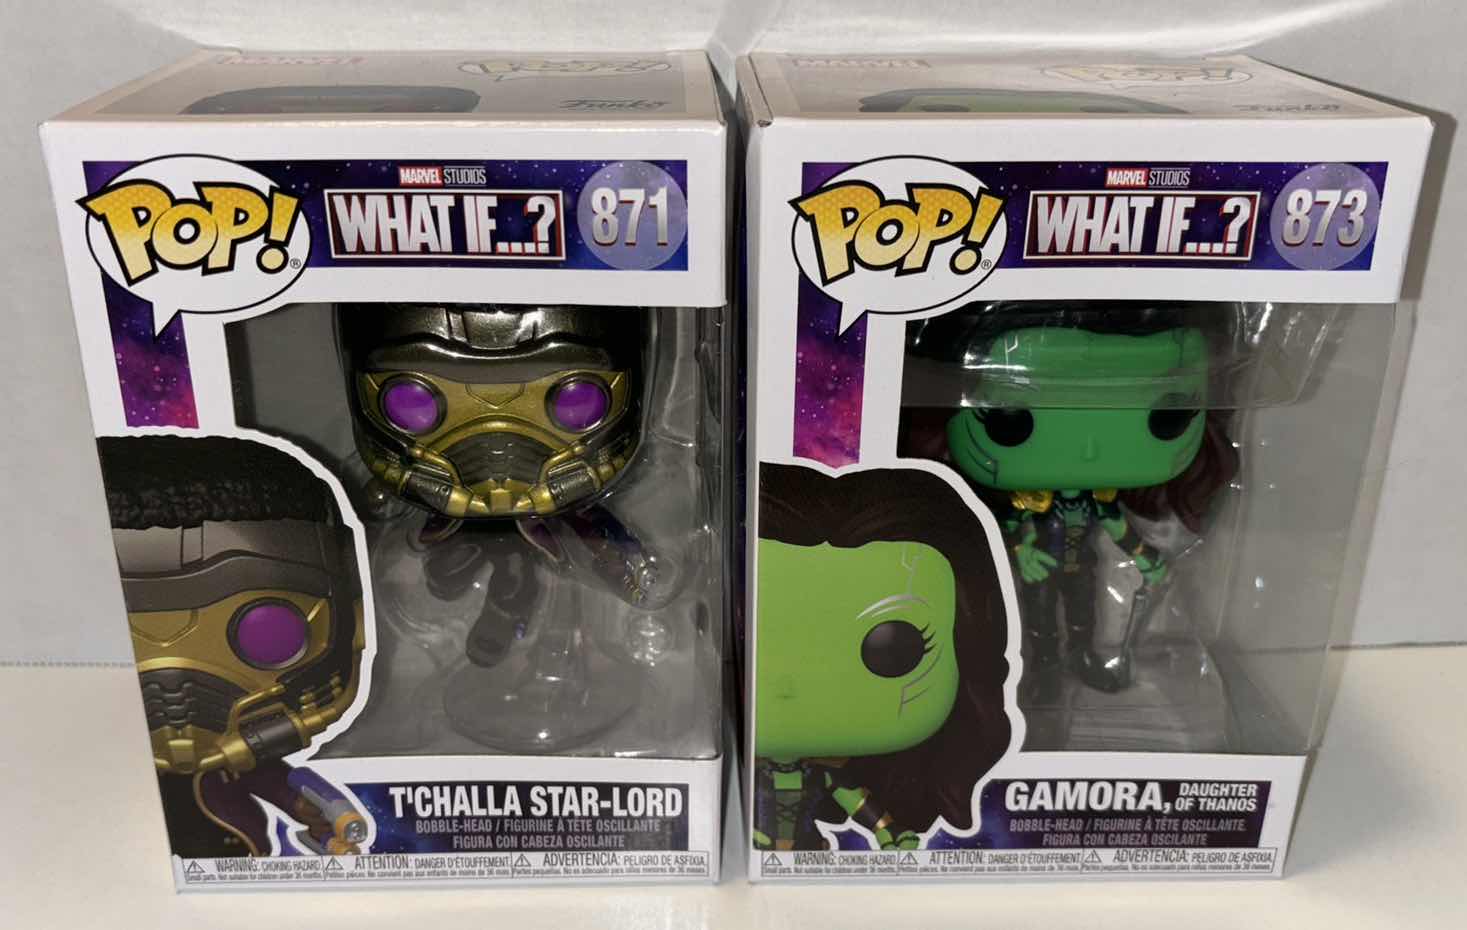 Photo 1 of NEW FUNKO POP! 2-PACK MARVEL STUDIOS WHAT IF…? VINYL BOBBLE-HEAD FIGURES, #871 T’CHALLA STAR-LORD & #873 GAMORA DAUGHTER OF THANOS